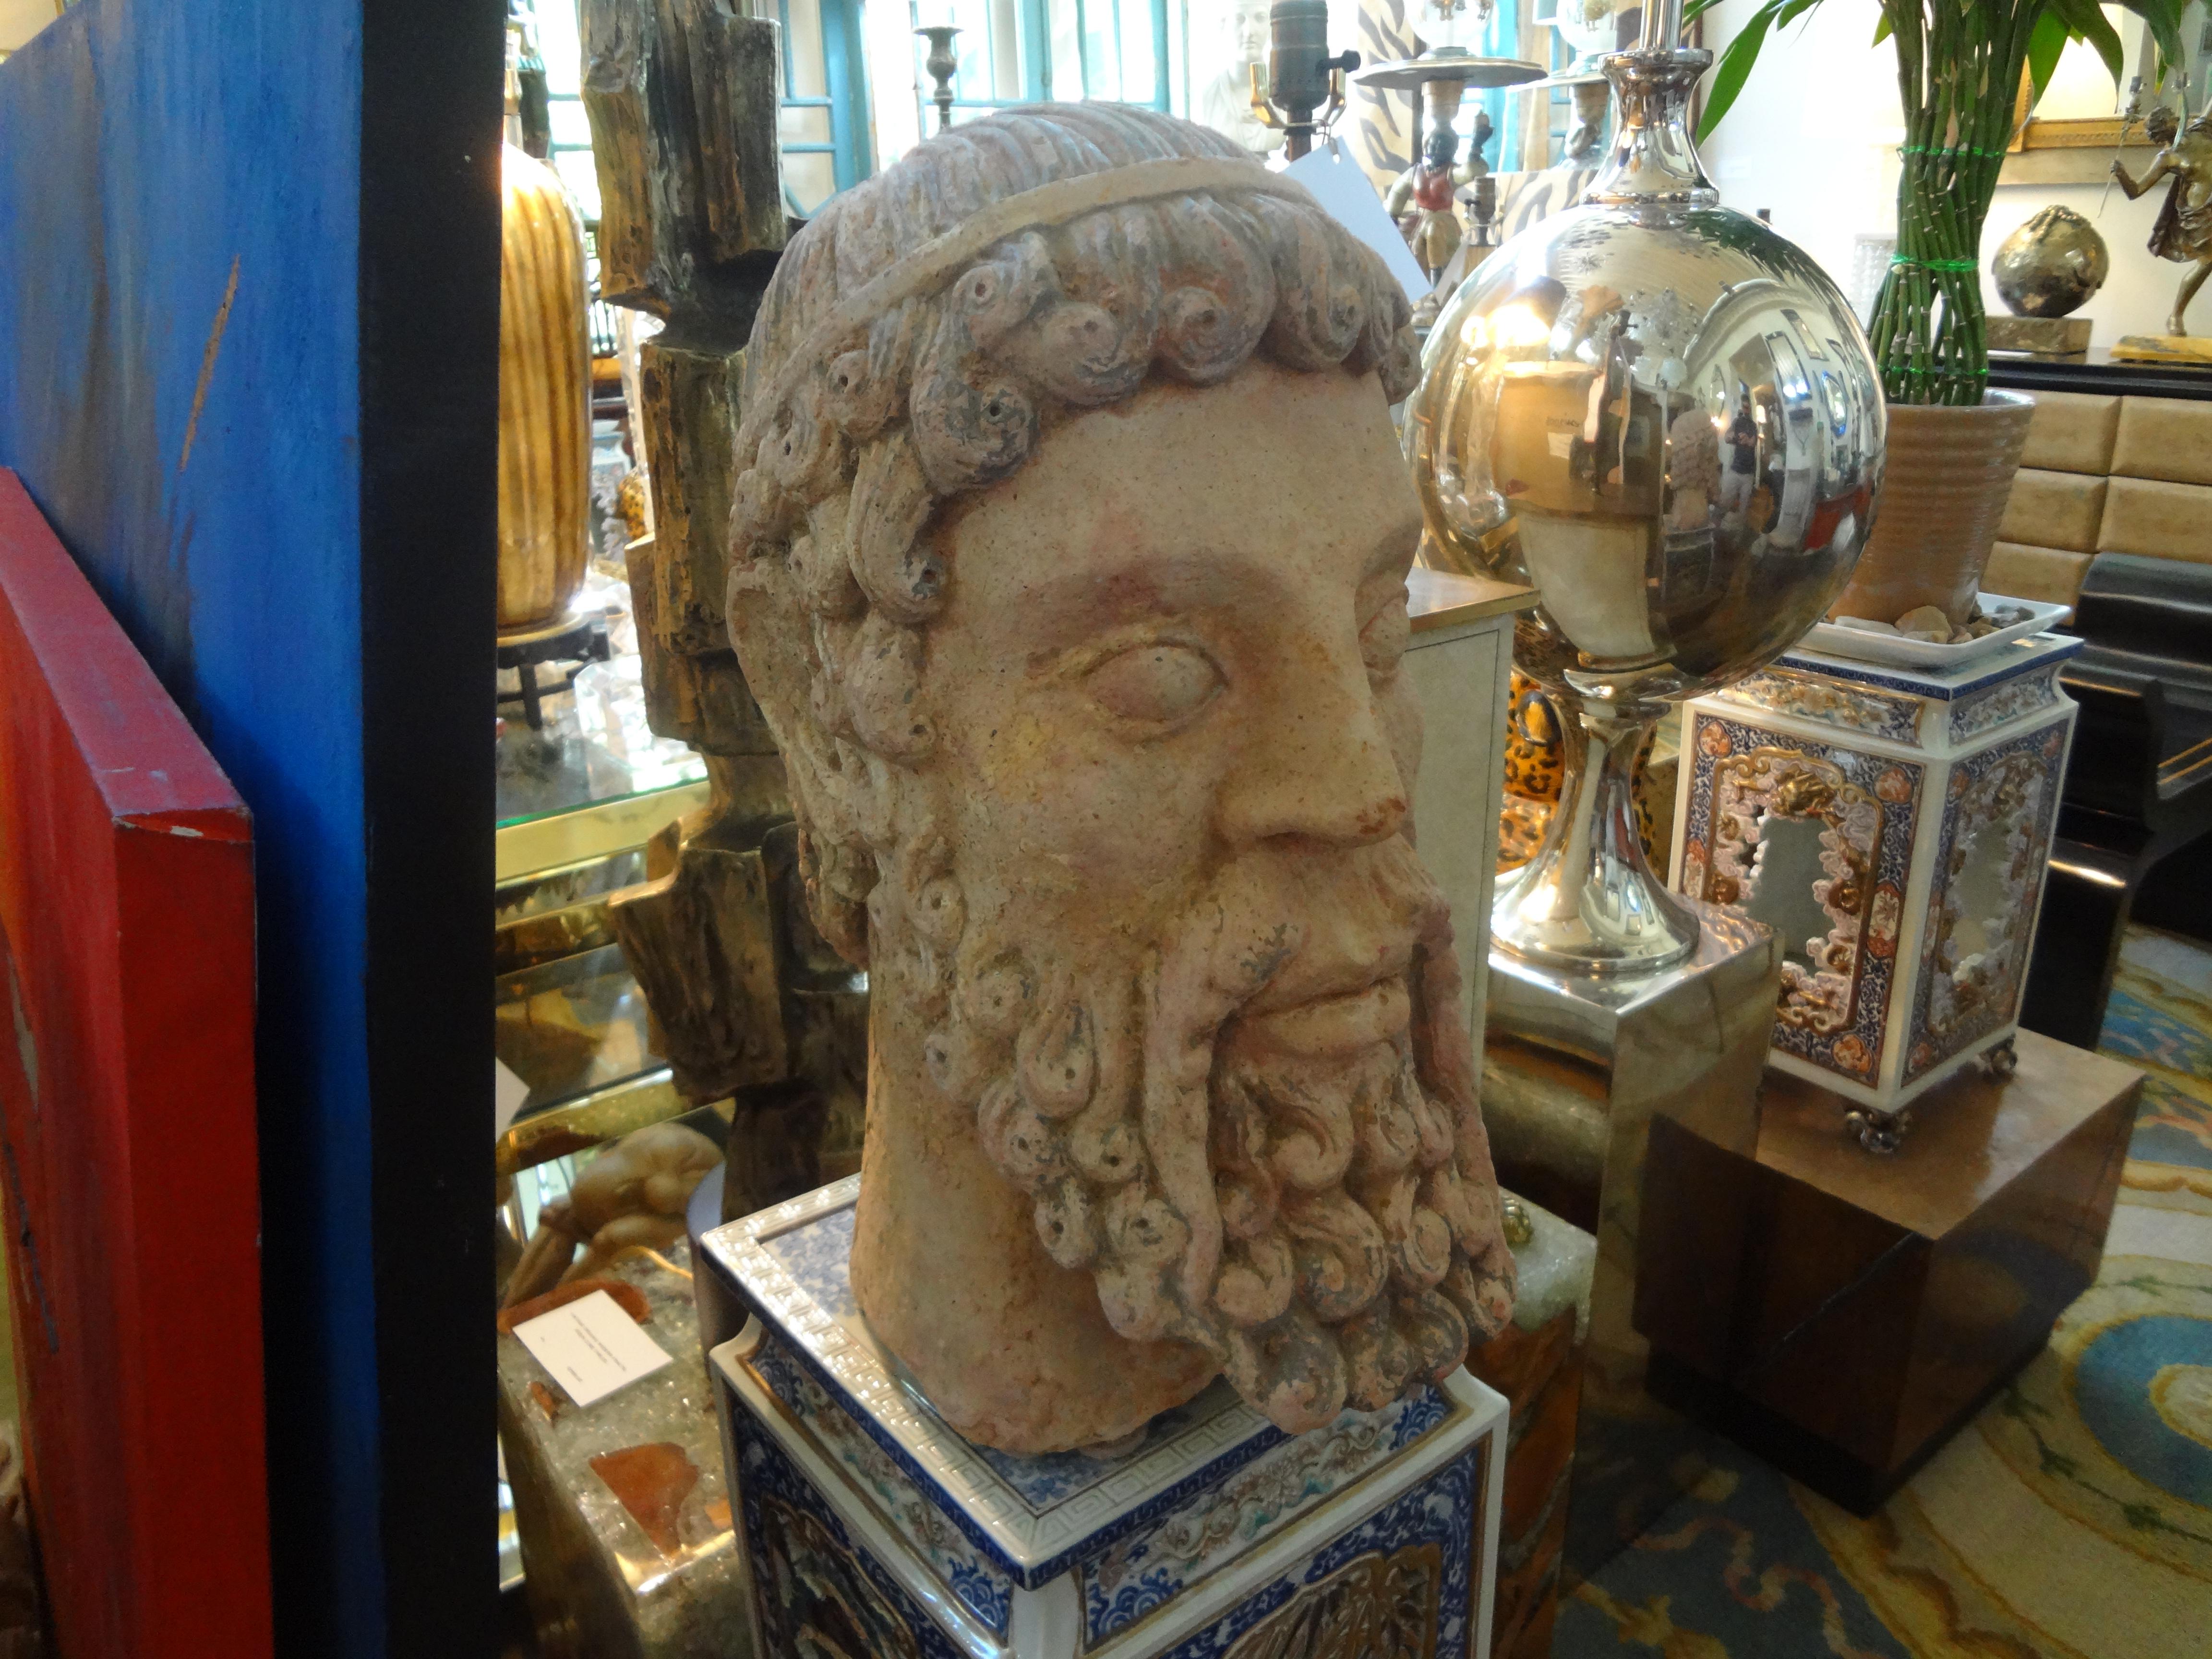 Antique Italian Terracotta bust of a Greco Roman.
Handsome large antique Italian terracotta bust of an ancient Greco Roman. This stunning sculpture is well executed and has some restorations at the base which give it a much older look.